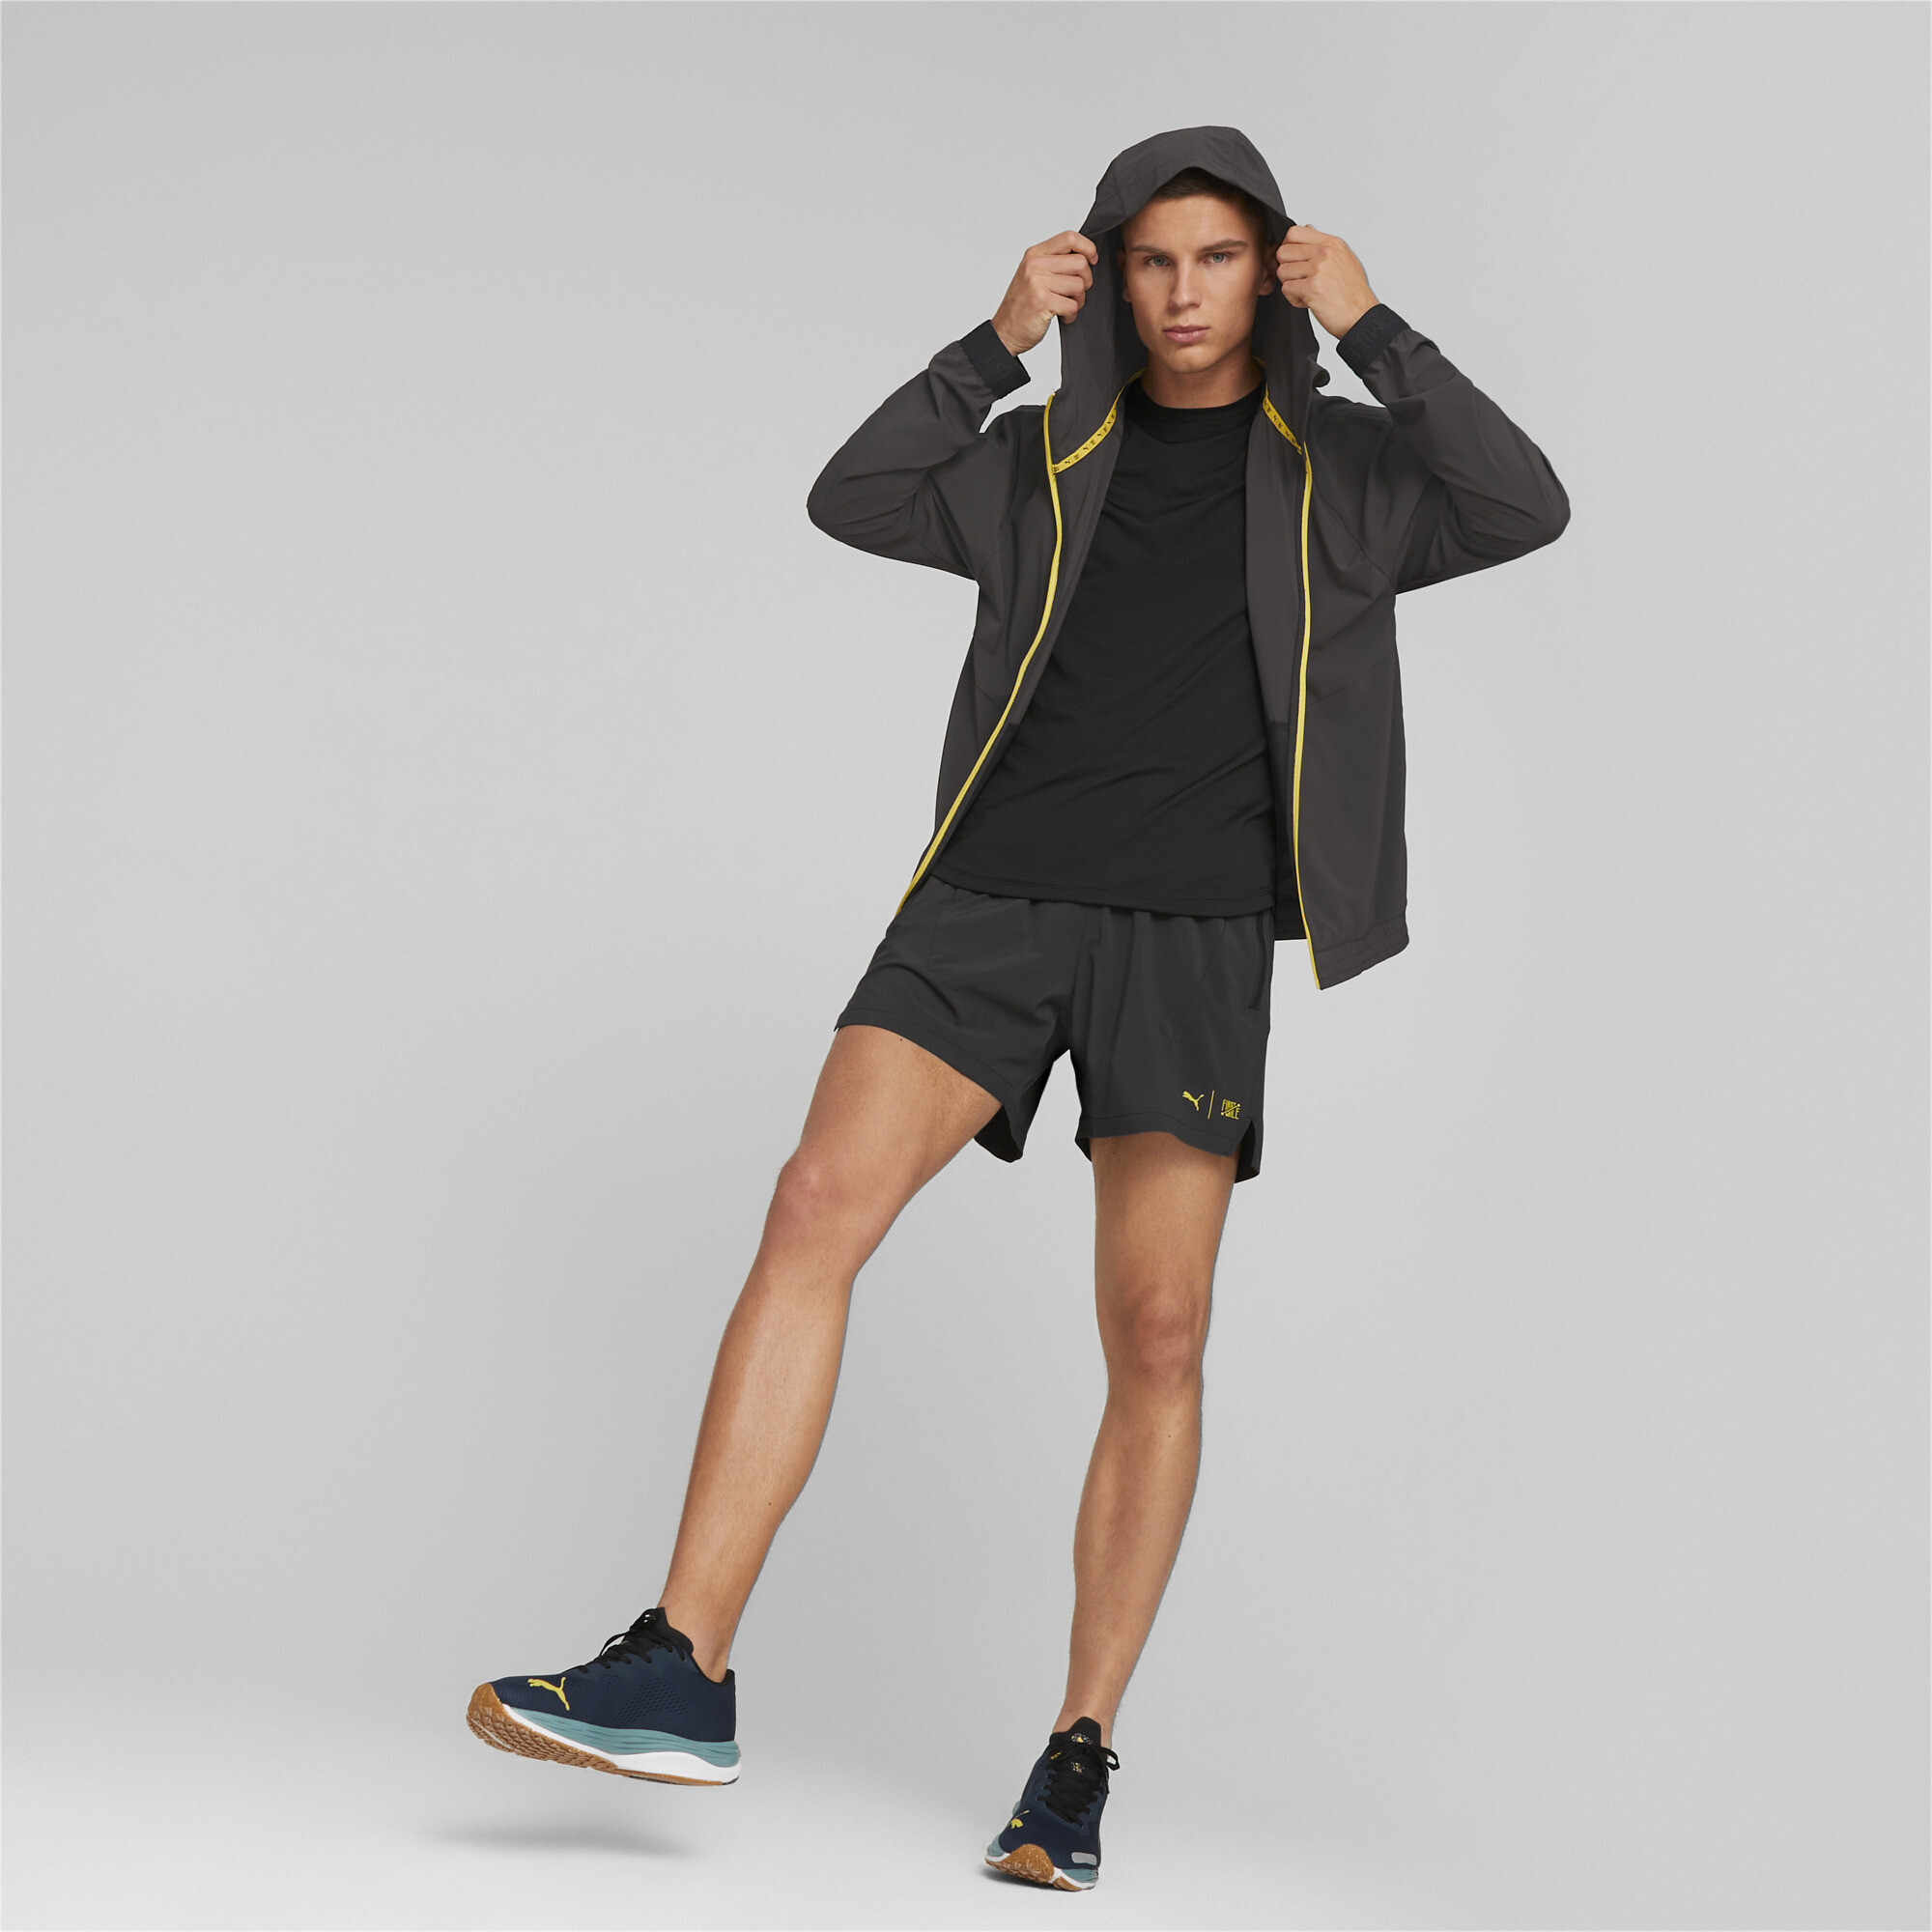 Men's PUMA X First Mile Woven 5 Running Shorts Men In Black, Size XS